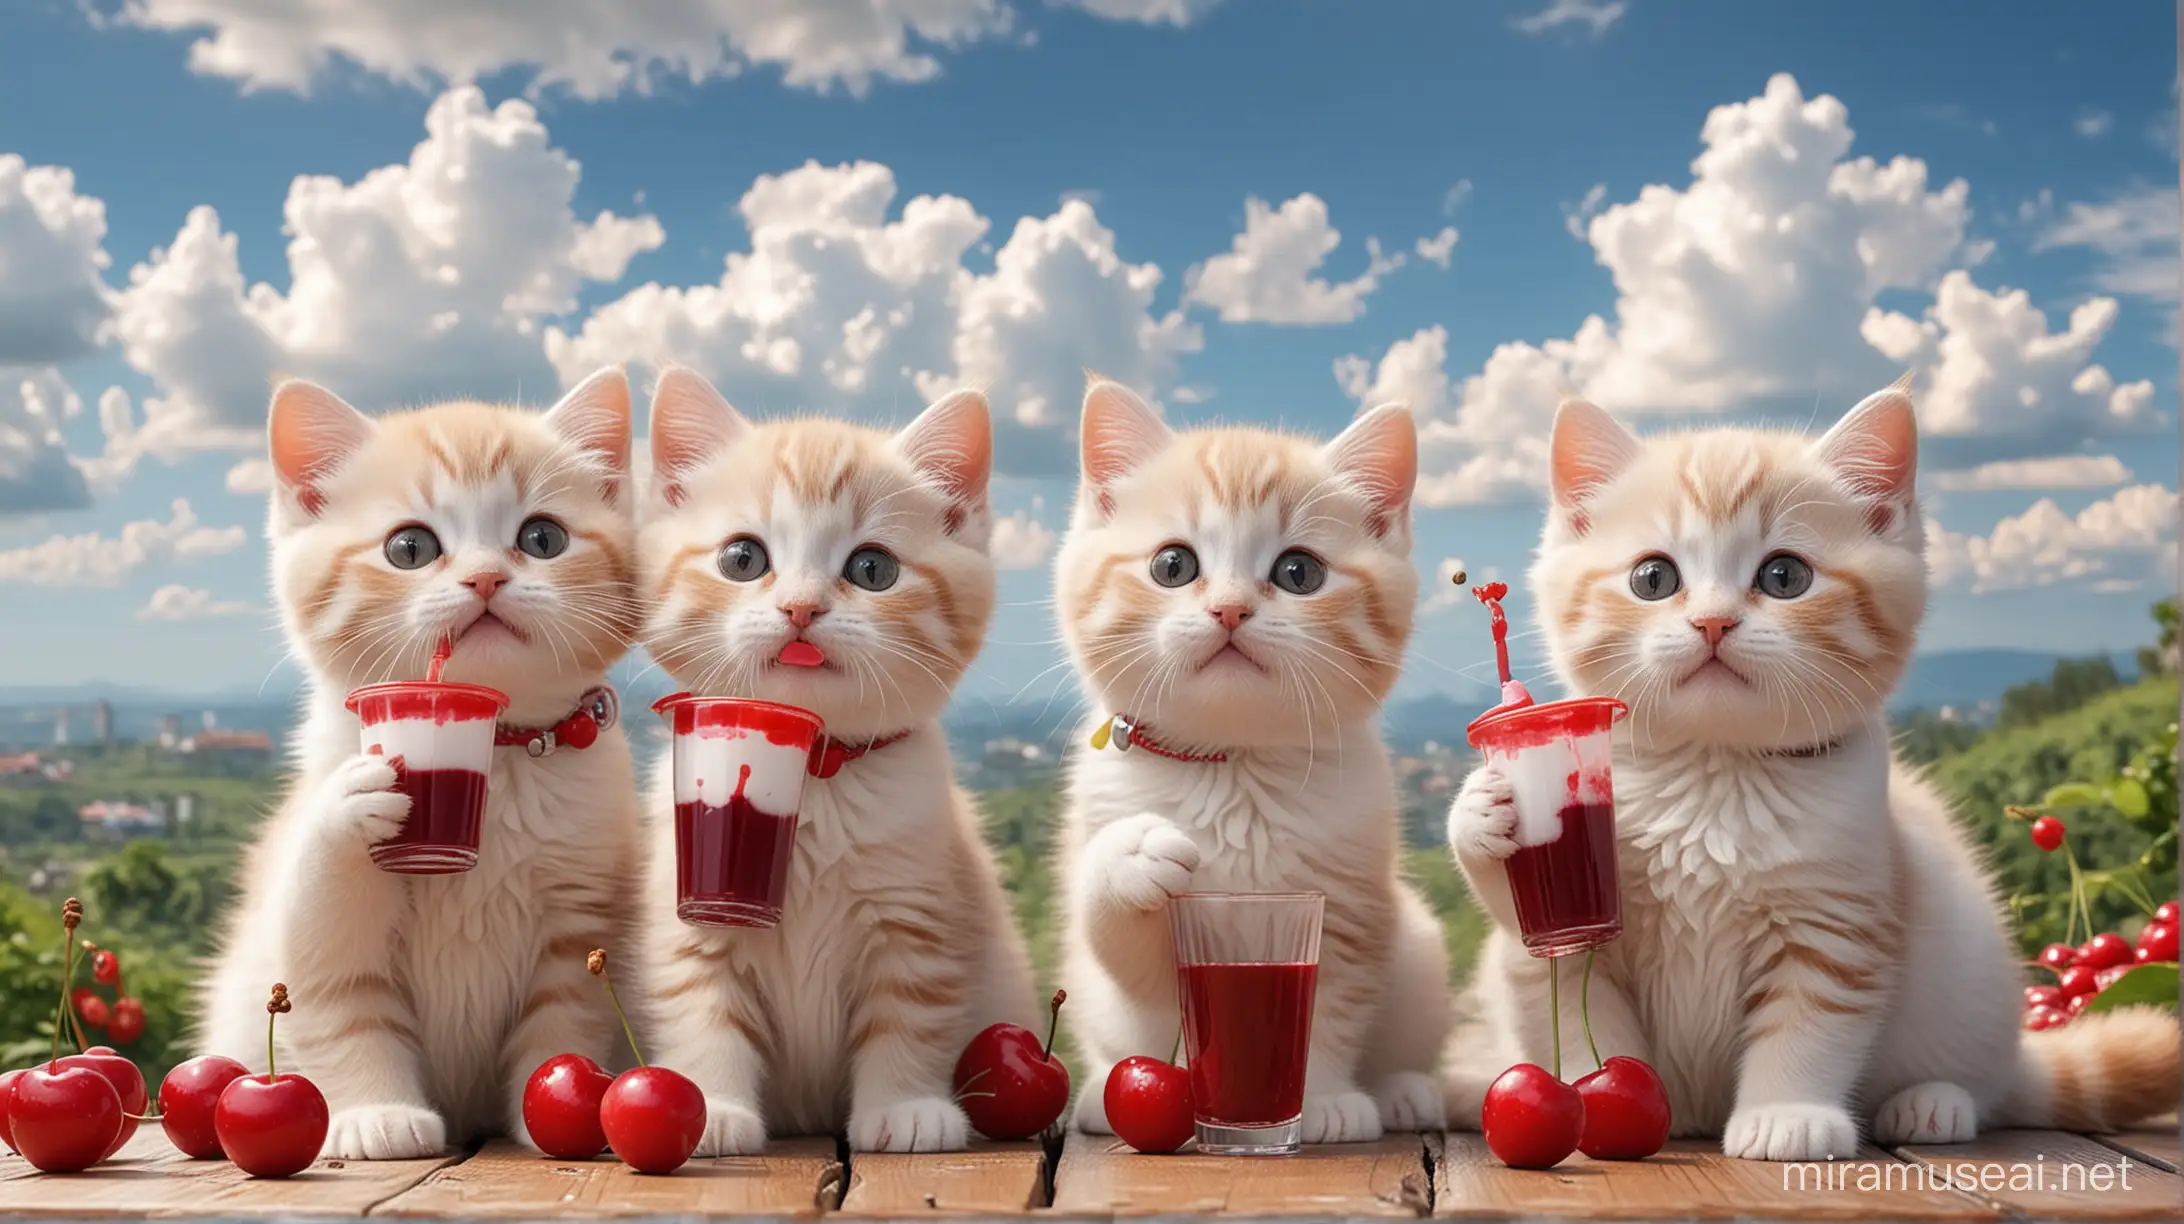 Little cats, They are very happy, drinking cherry juice, TOYS, SKY, CLOUDS, Phones, the scenery is very beautiful.